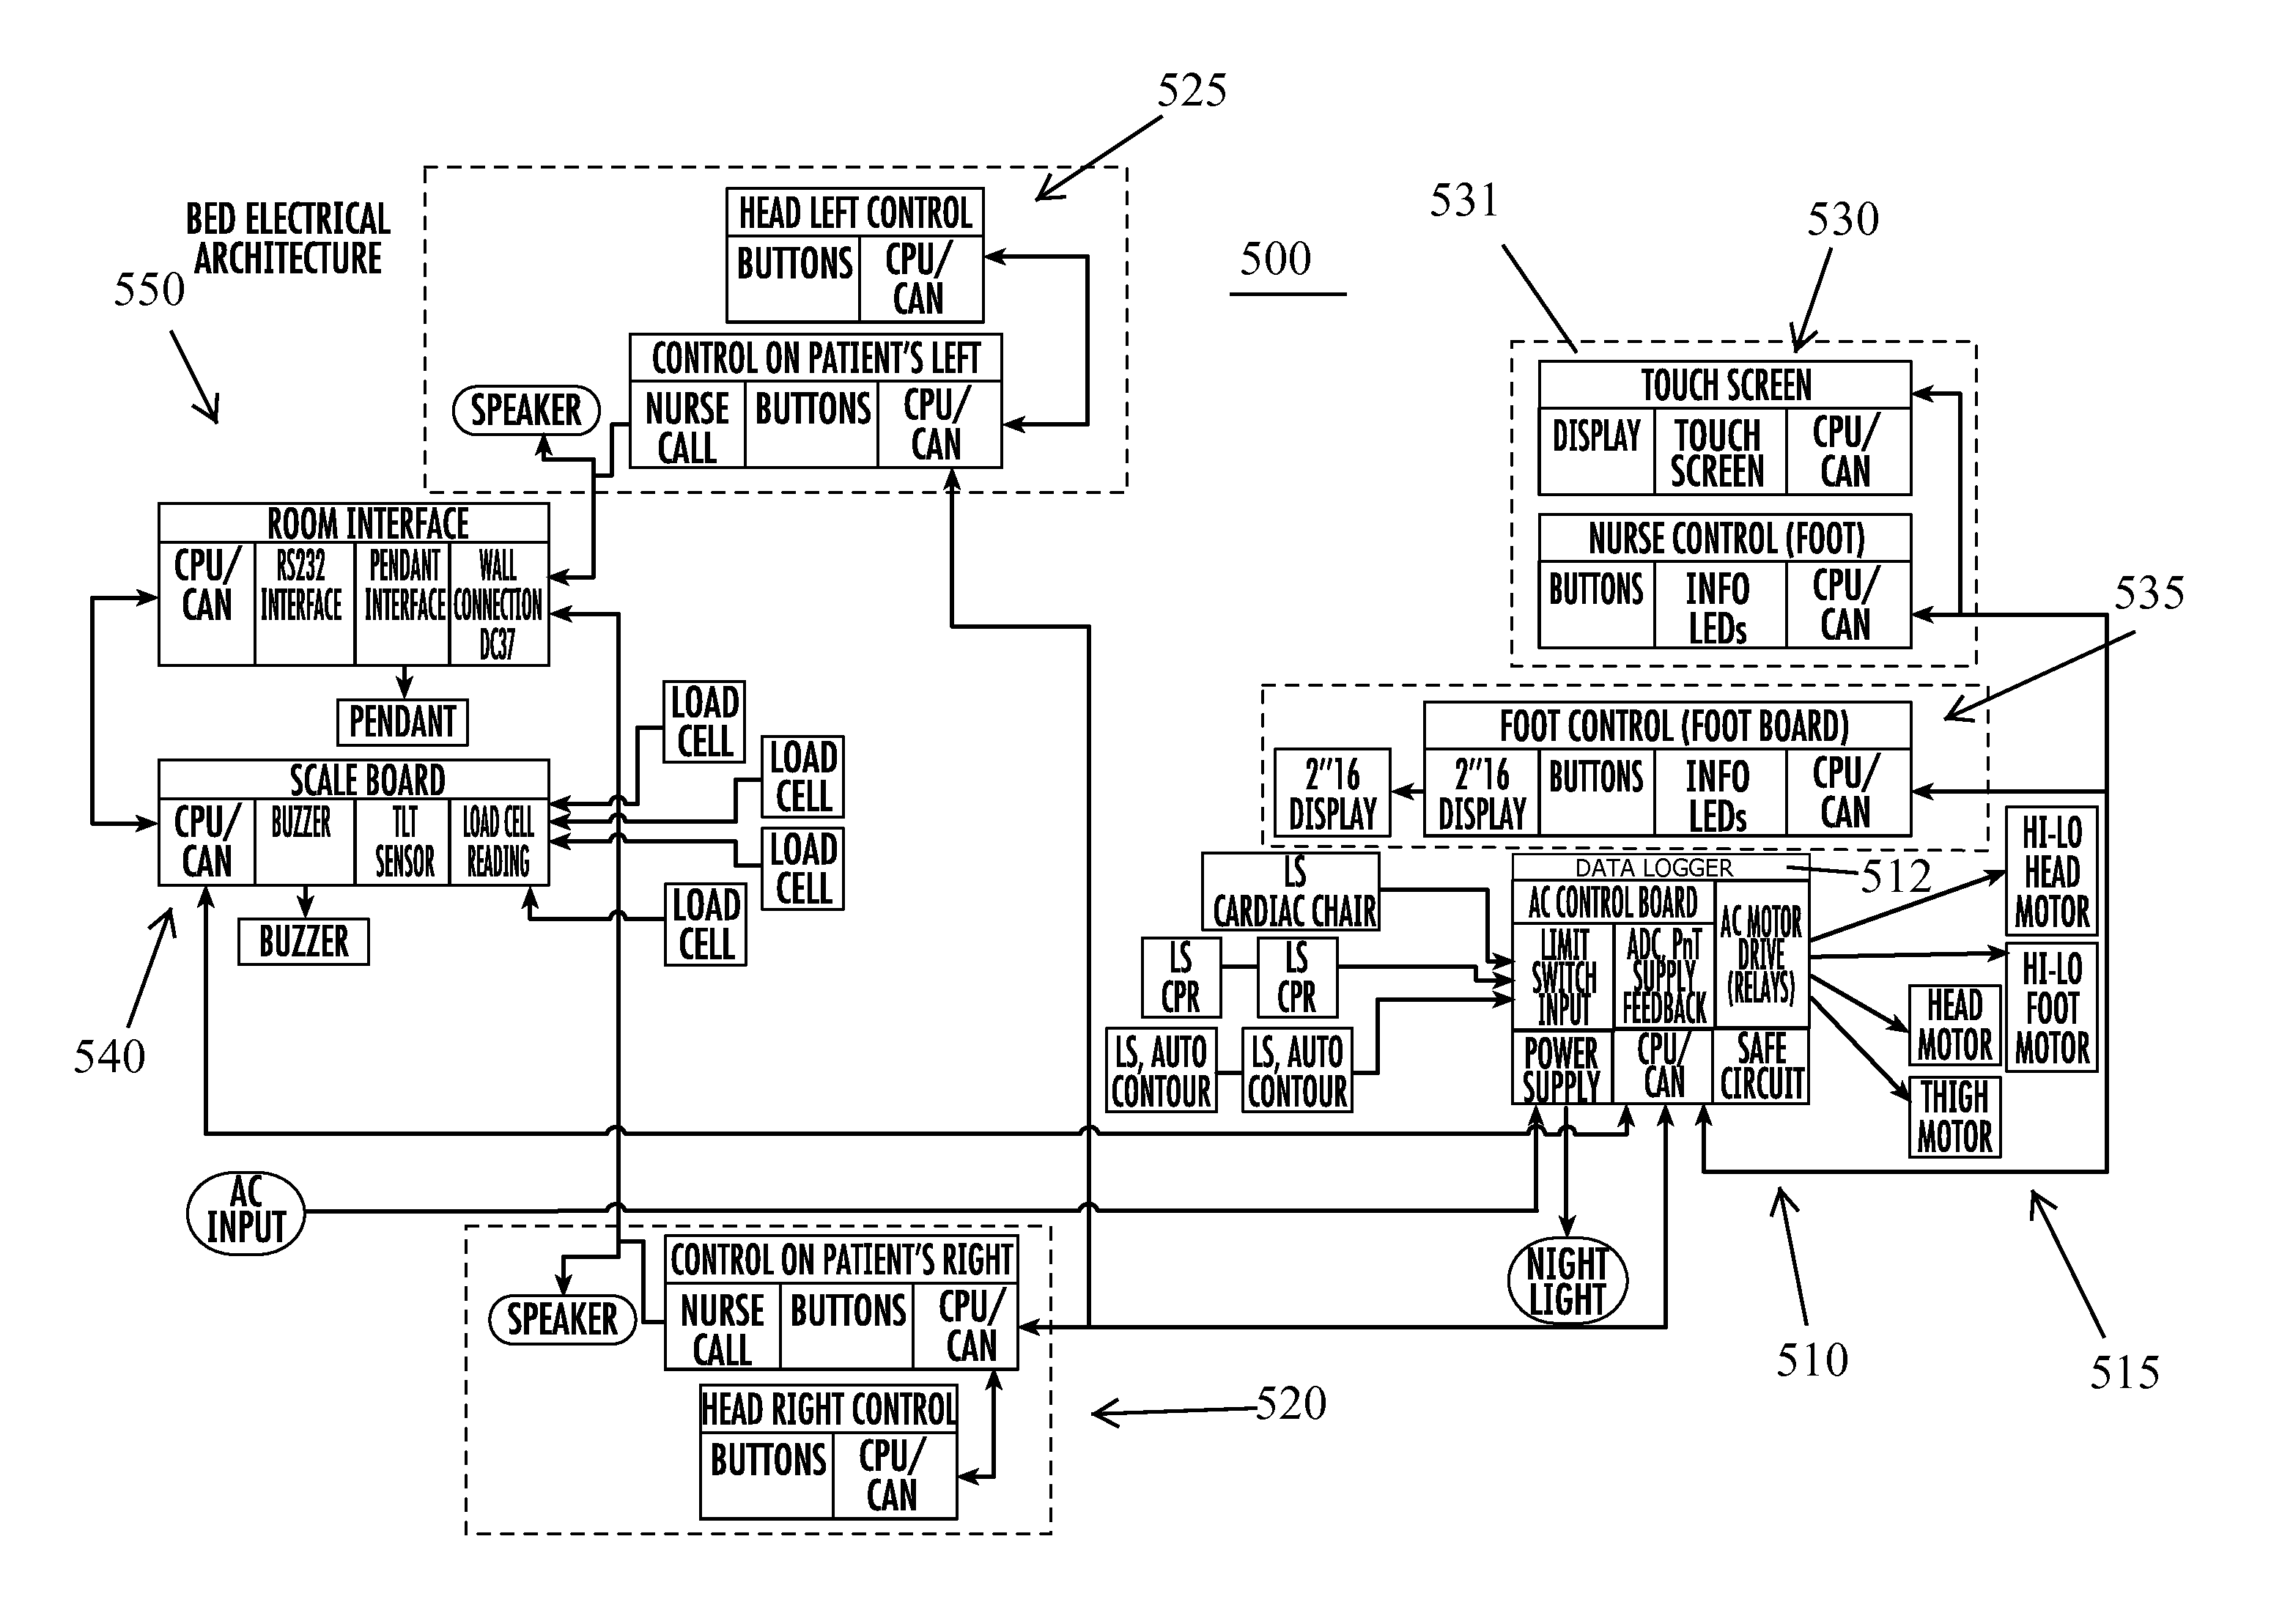 Diagnostic and control system for a patient support